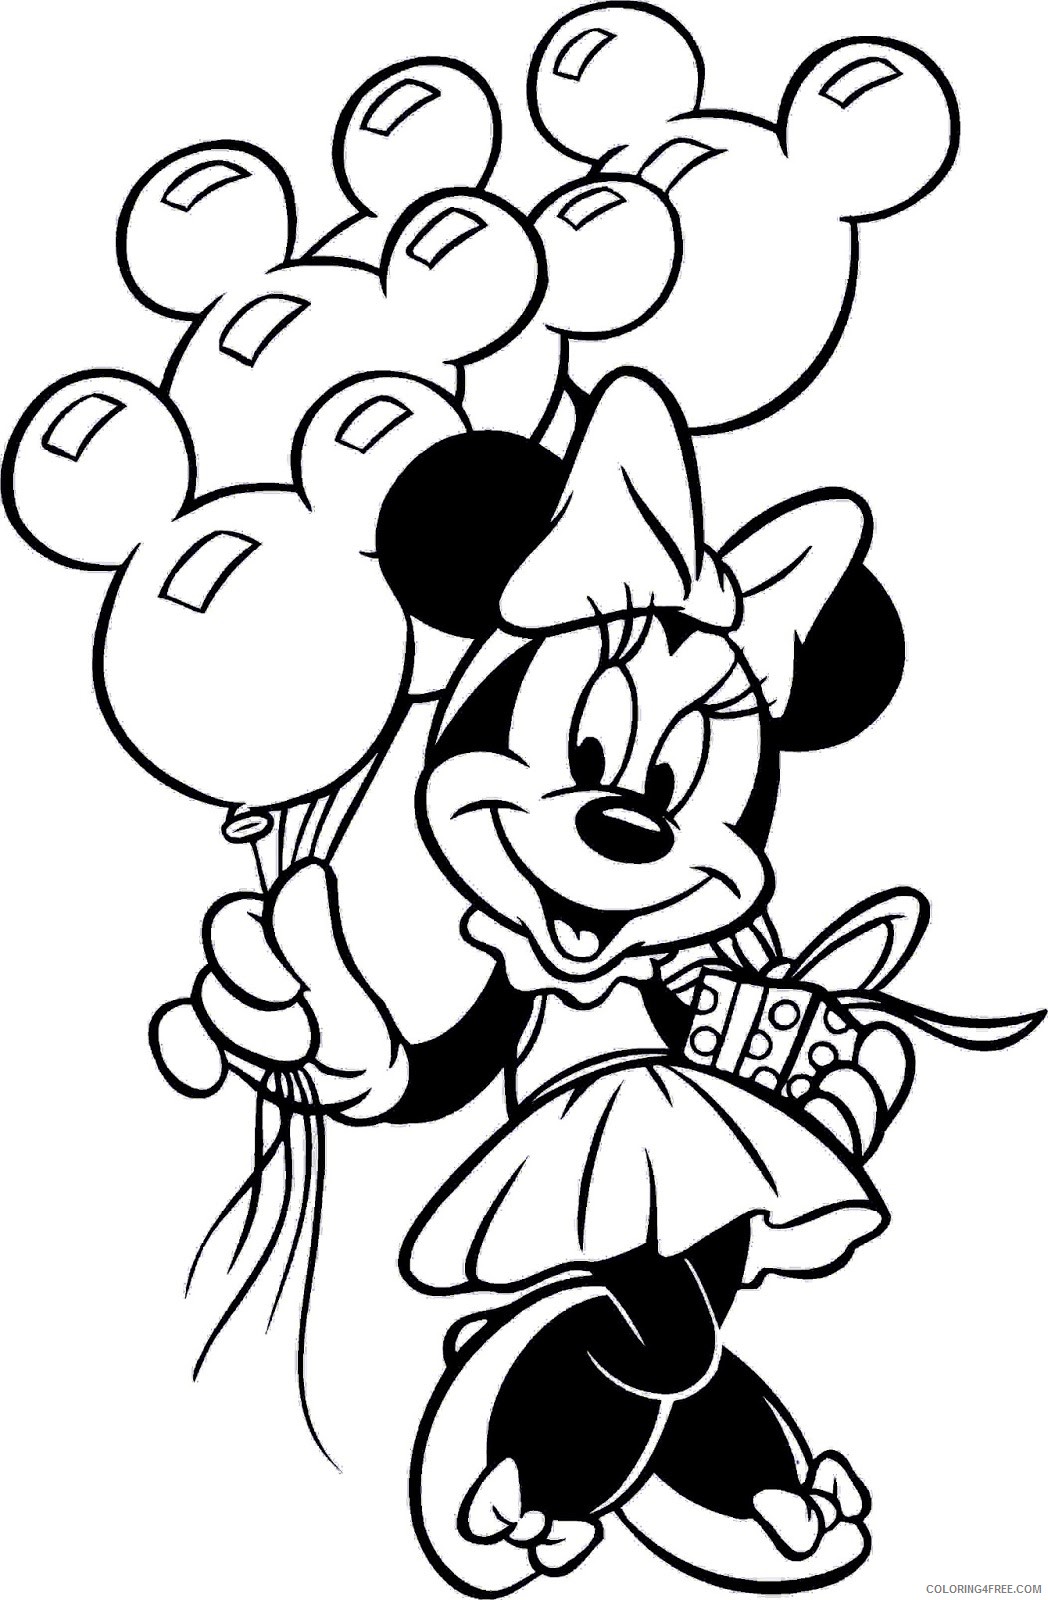 Minnie Mouse Coloring Pages Cartoons Minnie Mouse Christmas Printable 2020 4315 Coloring4free